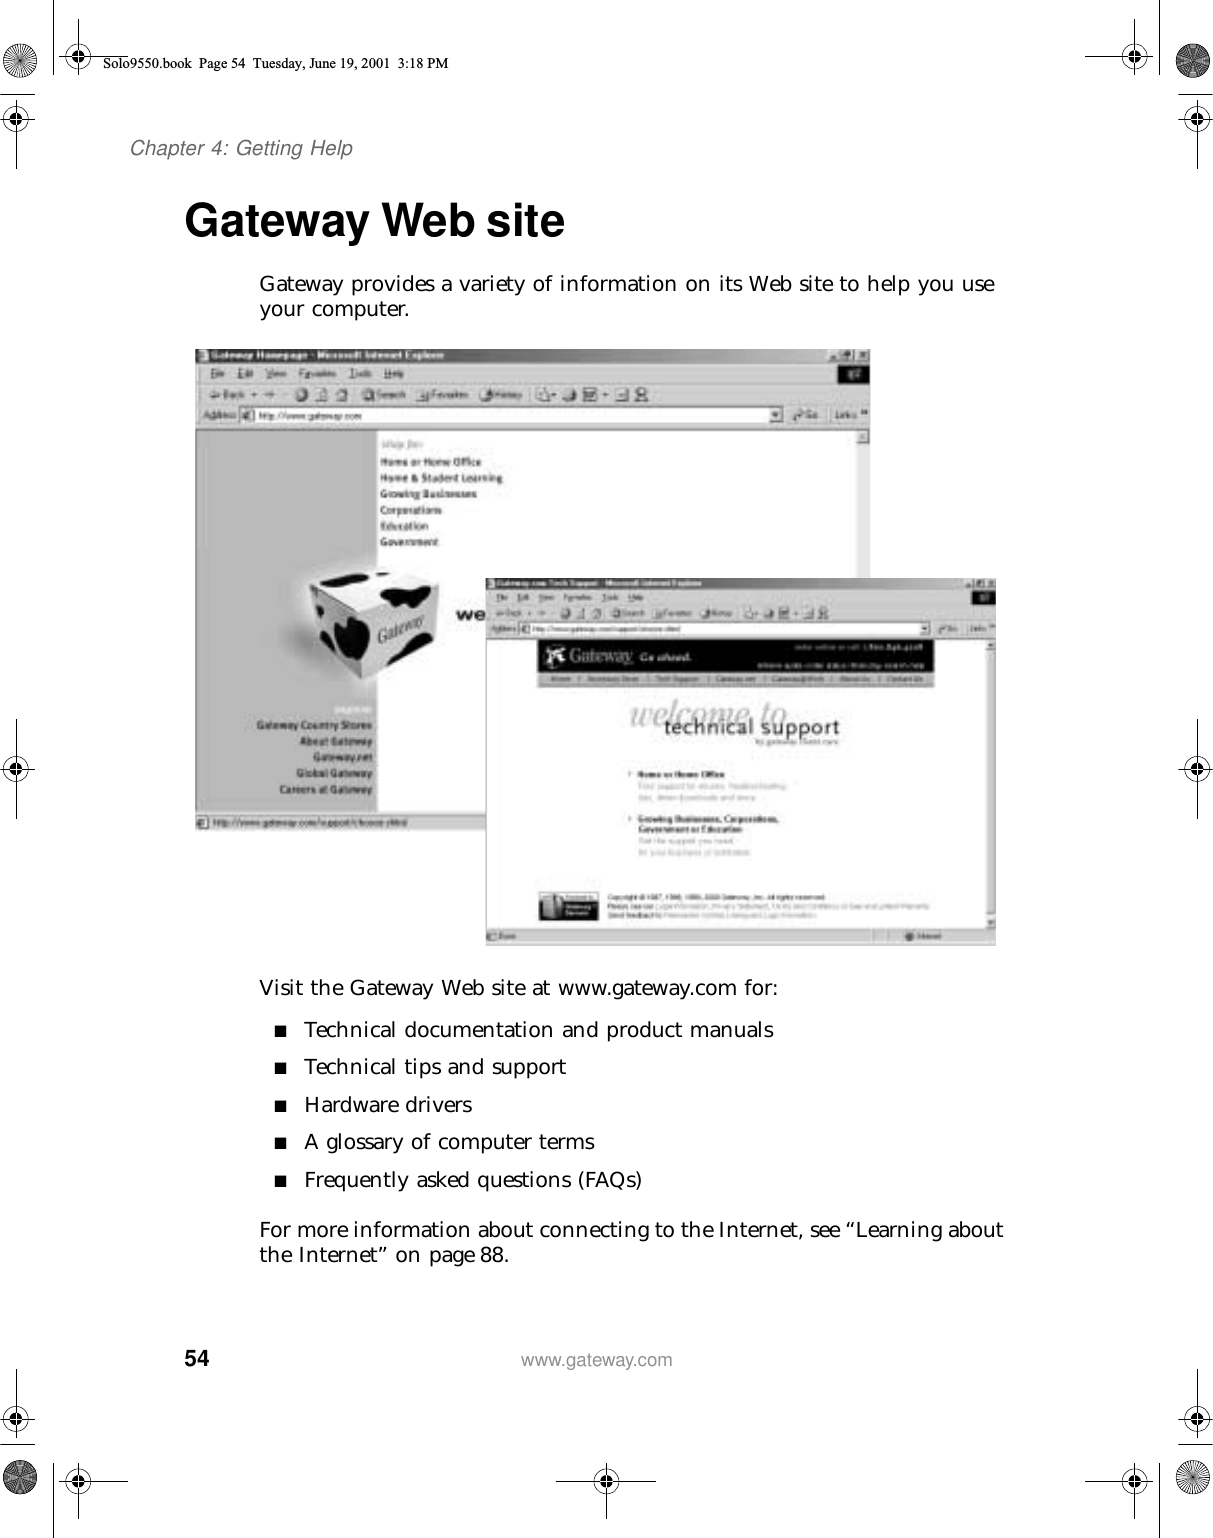 54Chapter 4: Getting Helpwww.gateway.comGateway Web siteGateway provides a variety of information on its Web site to help you use your computer.Visit the Gateway Web site at www.gateway.com for:■Technical documentation and product manuals■Technical tips and support■Hardware drivers■A glossary of computer terms■Frequently asked questions (FAQs)For more information about connecting to the Internet, see “Learning about the Internet” on page 88.Solo9550.book Page 54 Tuesday, June 19, 2001 3:18 PM